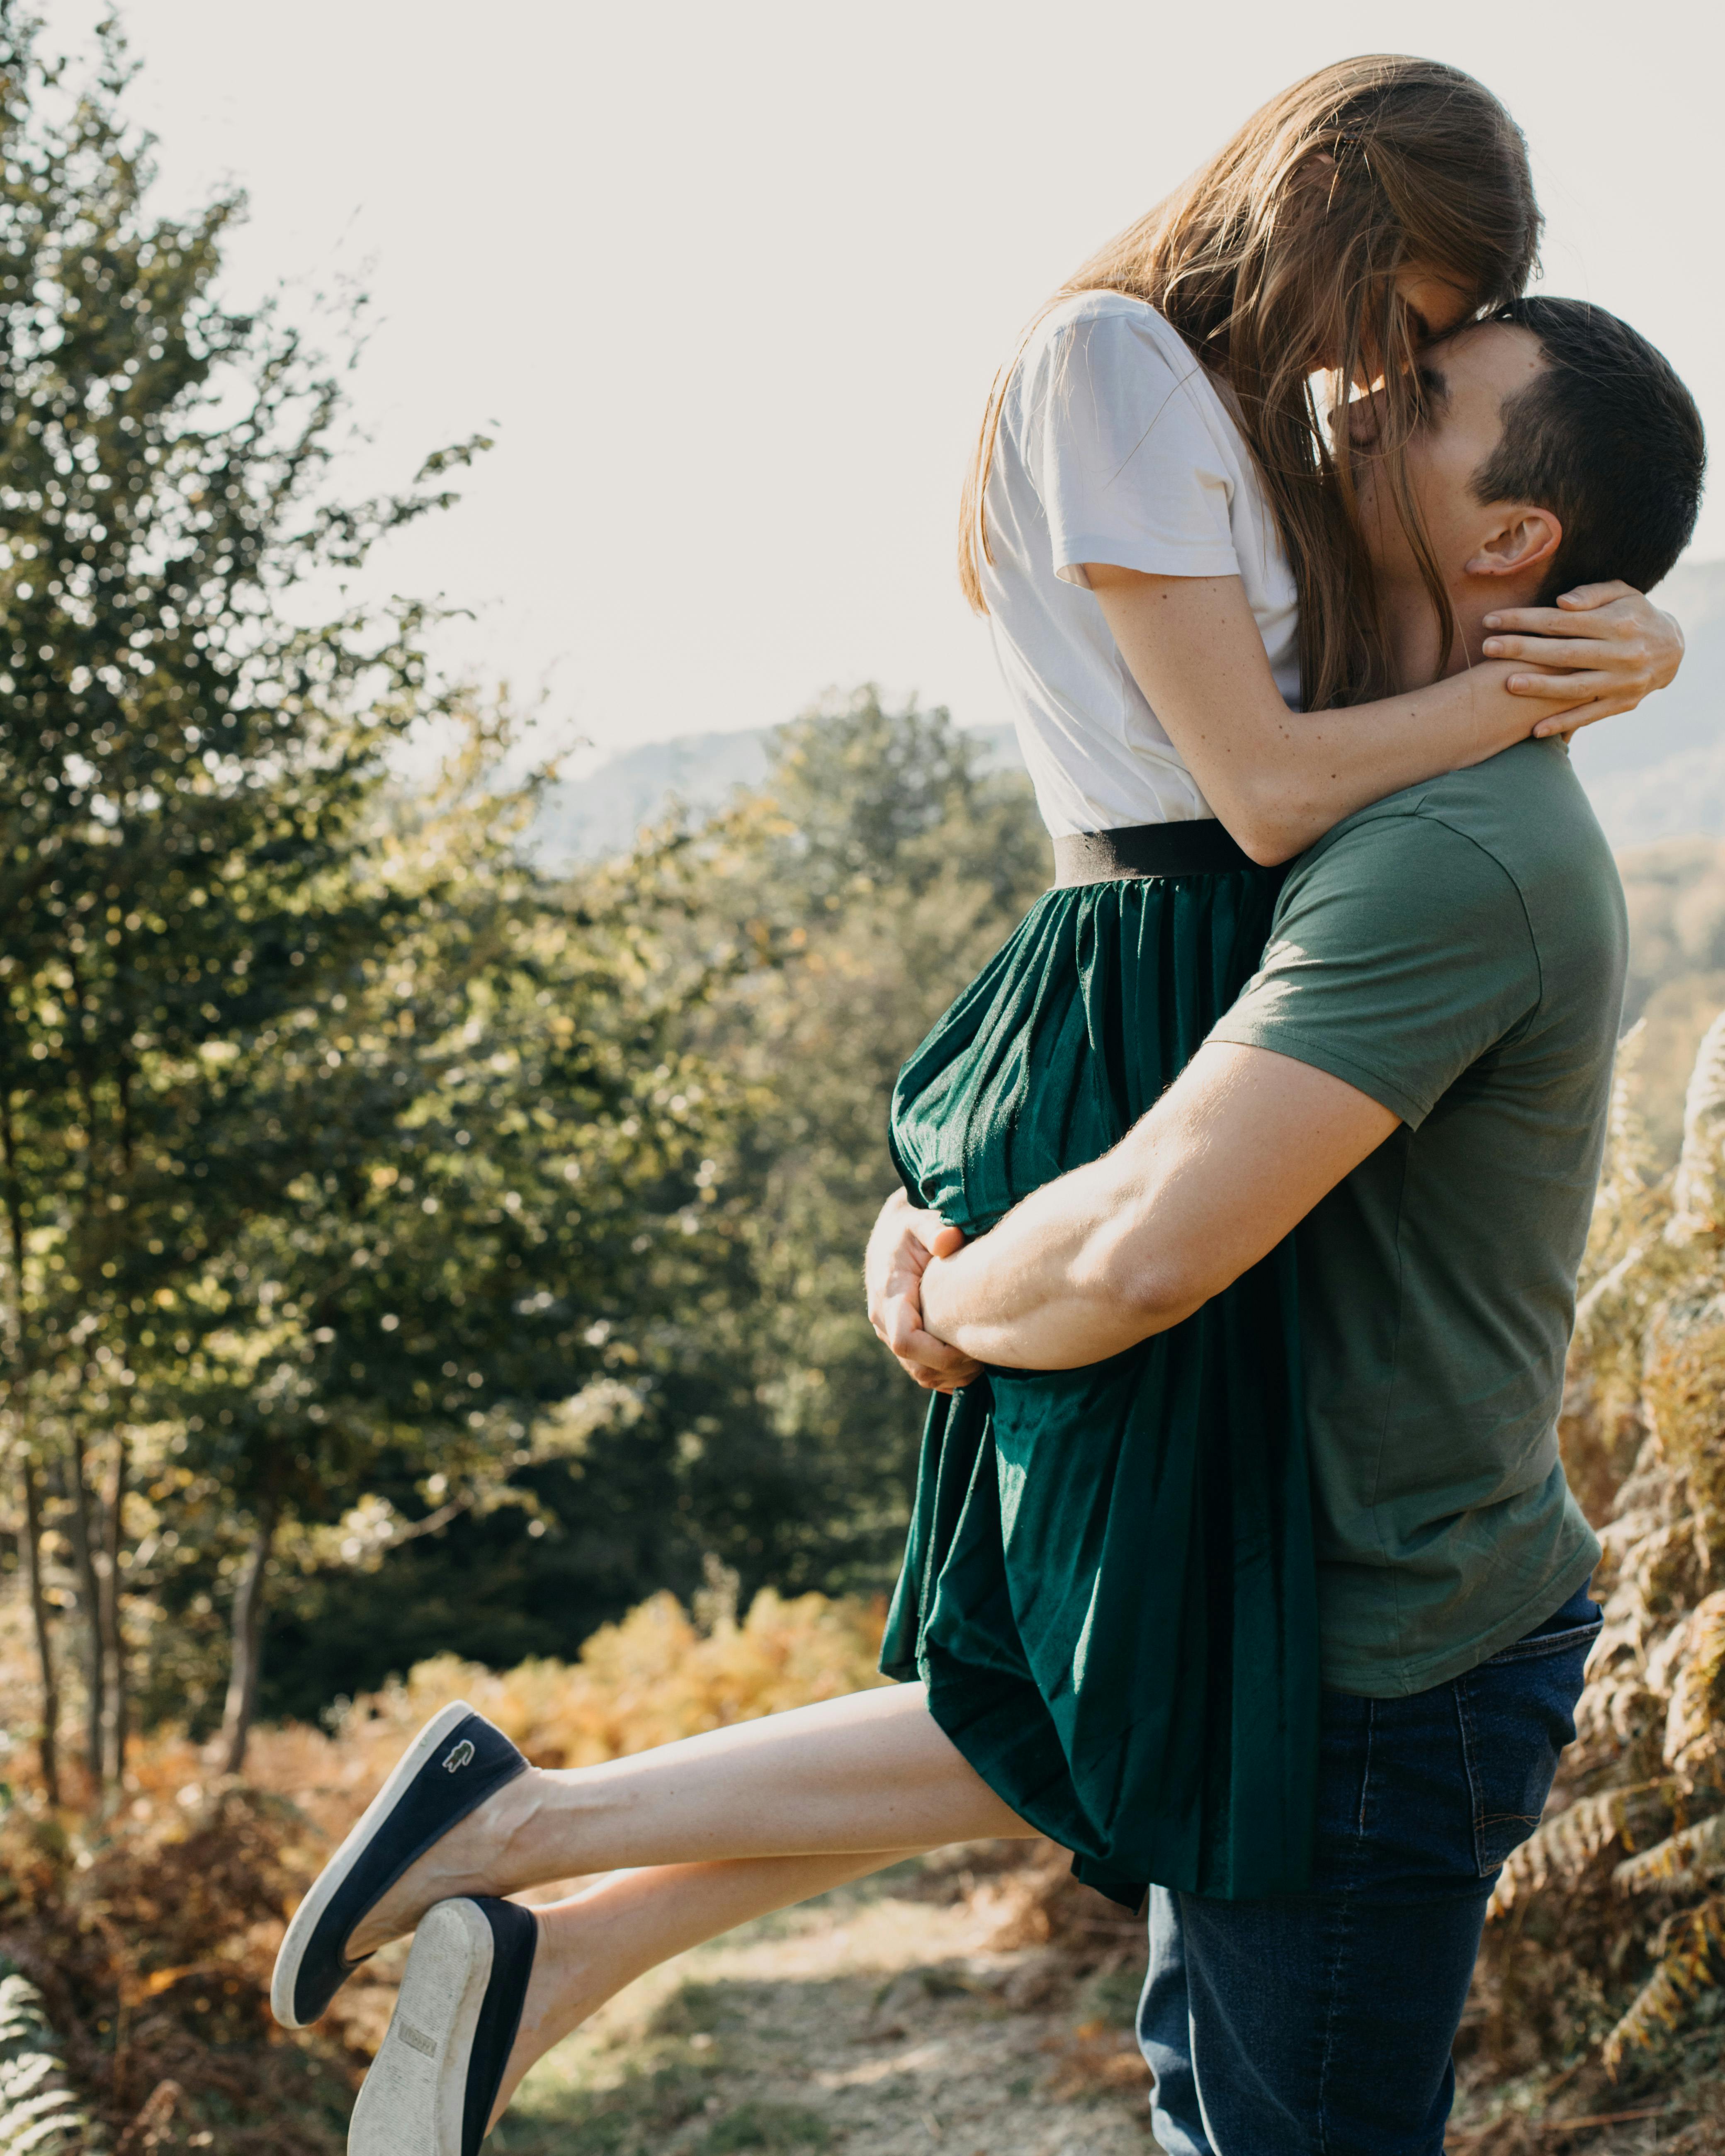 A happy young couple poses for a photo | Source: Dmitriy Ganin on Pexels